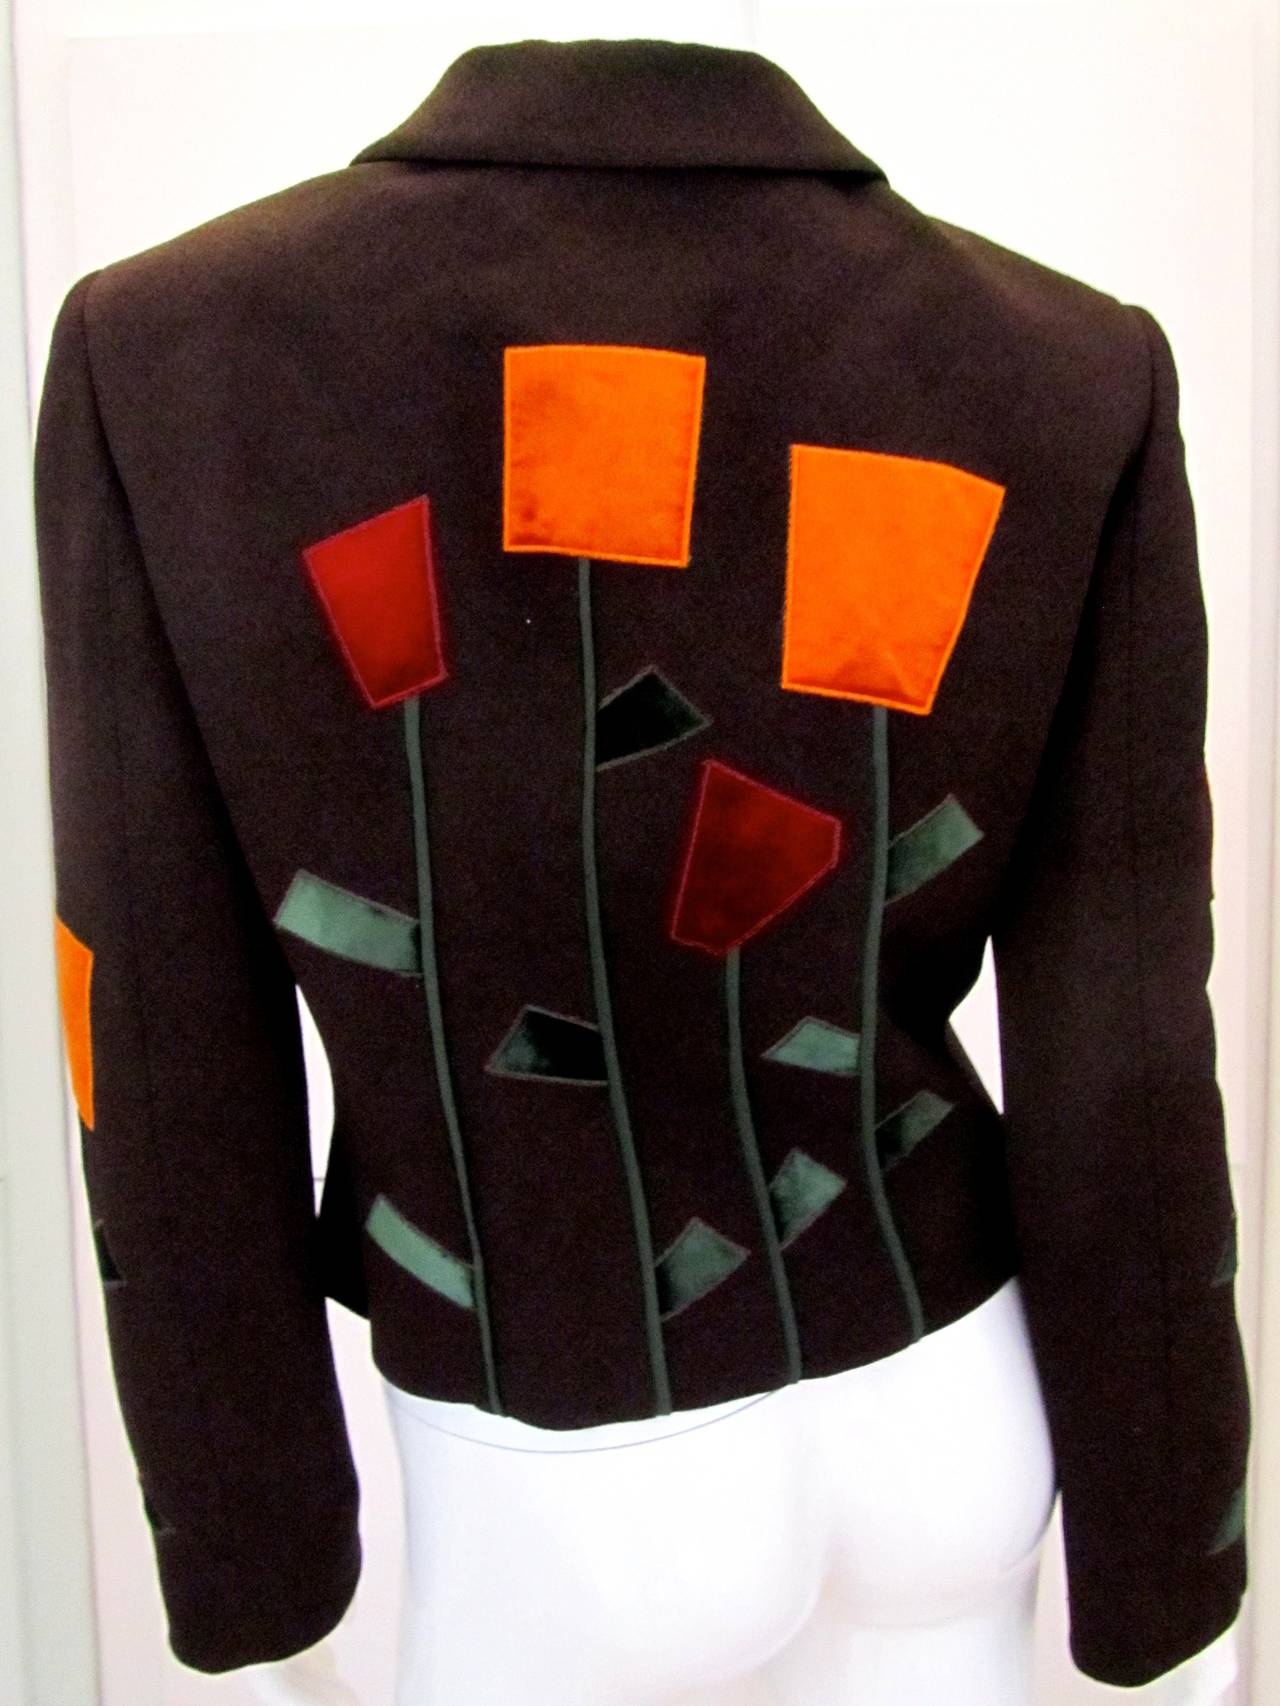 Moschino Cheap and Chic blazer with geometric flower design. The blazer is 75% rayon and 25% wool. The flowers are a soft shiny velvet and are orange, red, and green. Jacket is in excellent condition and is a magnificent example of Moschino's design